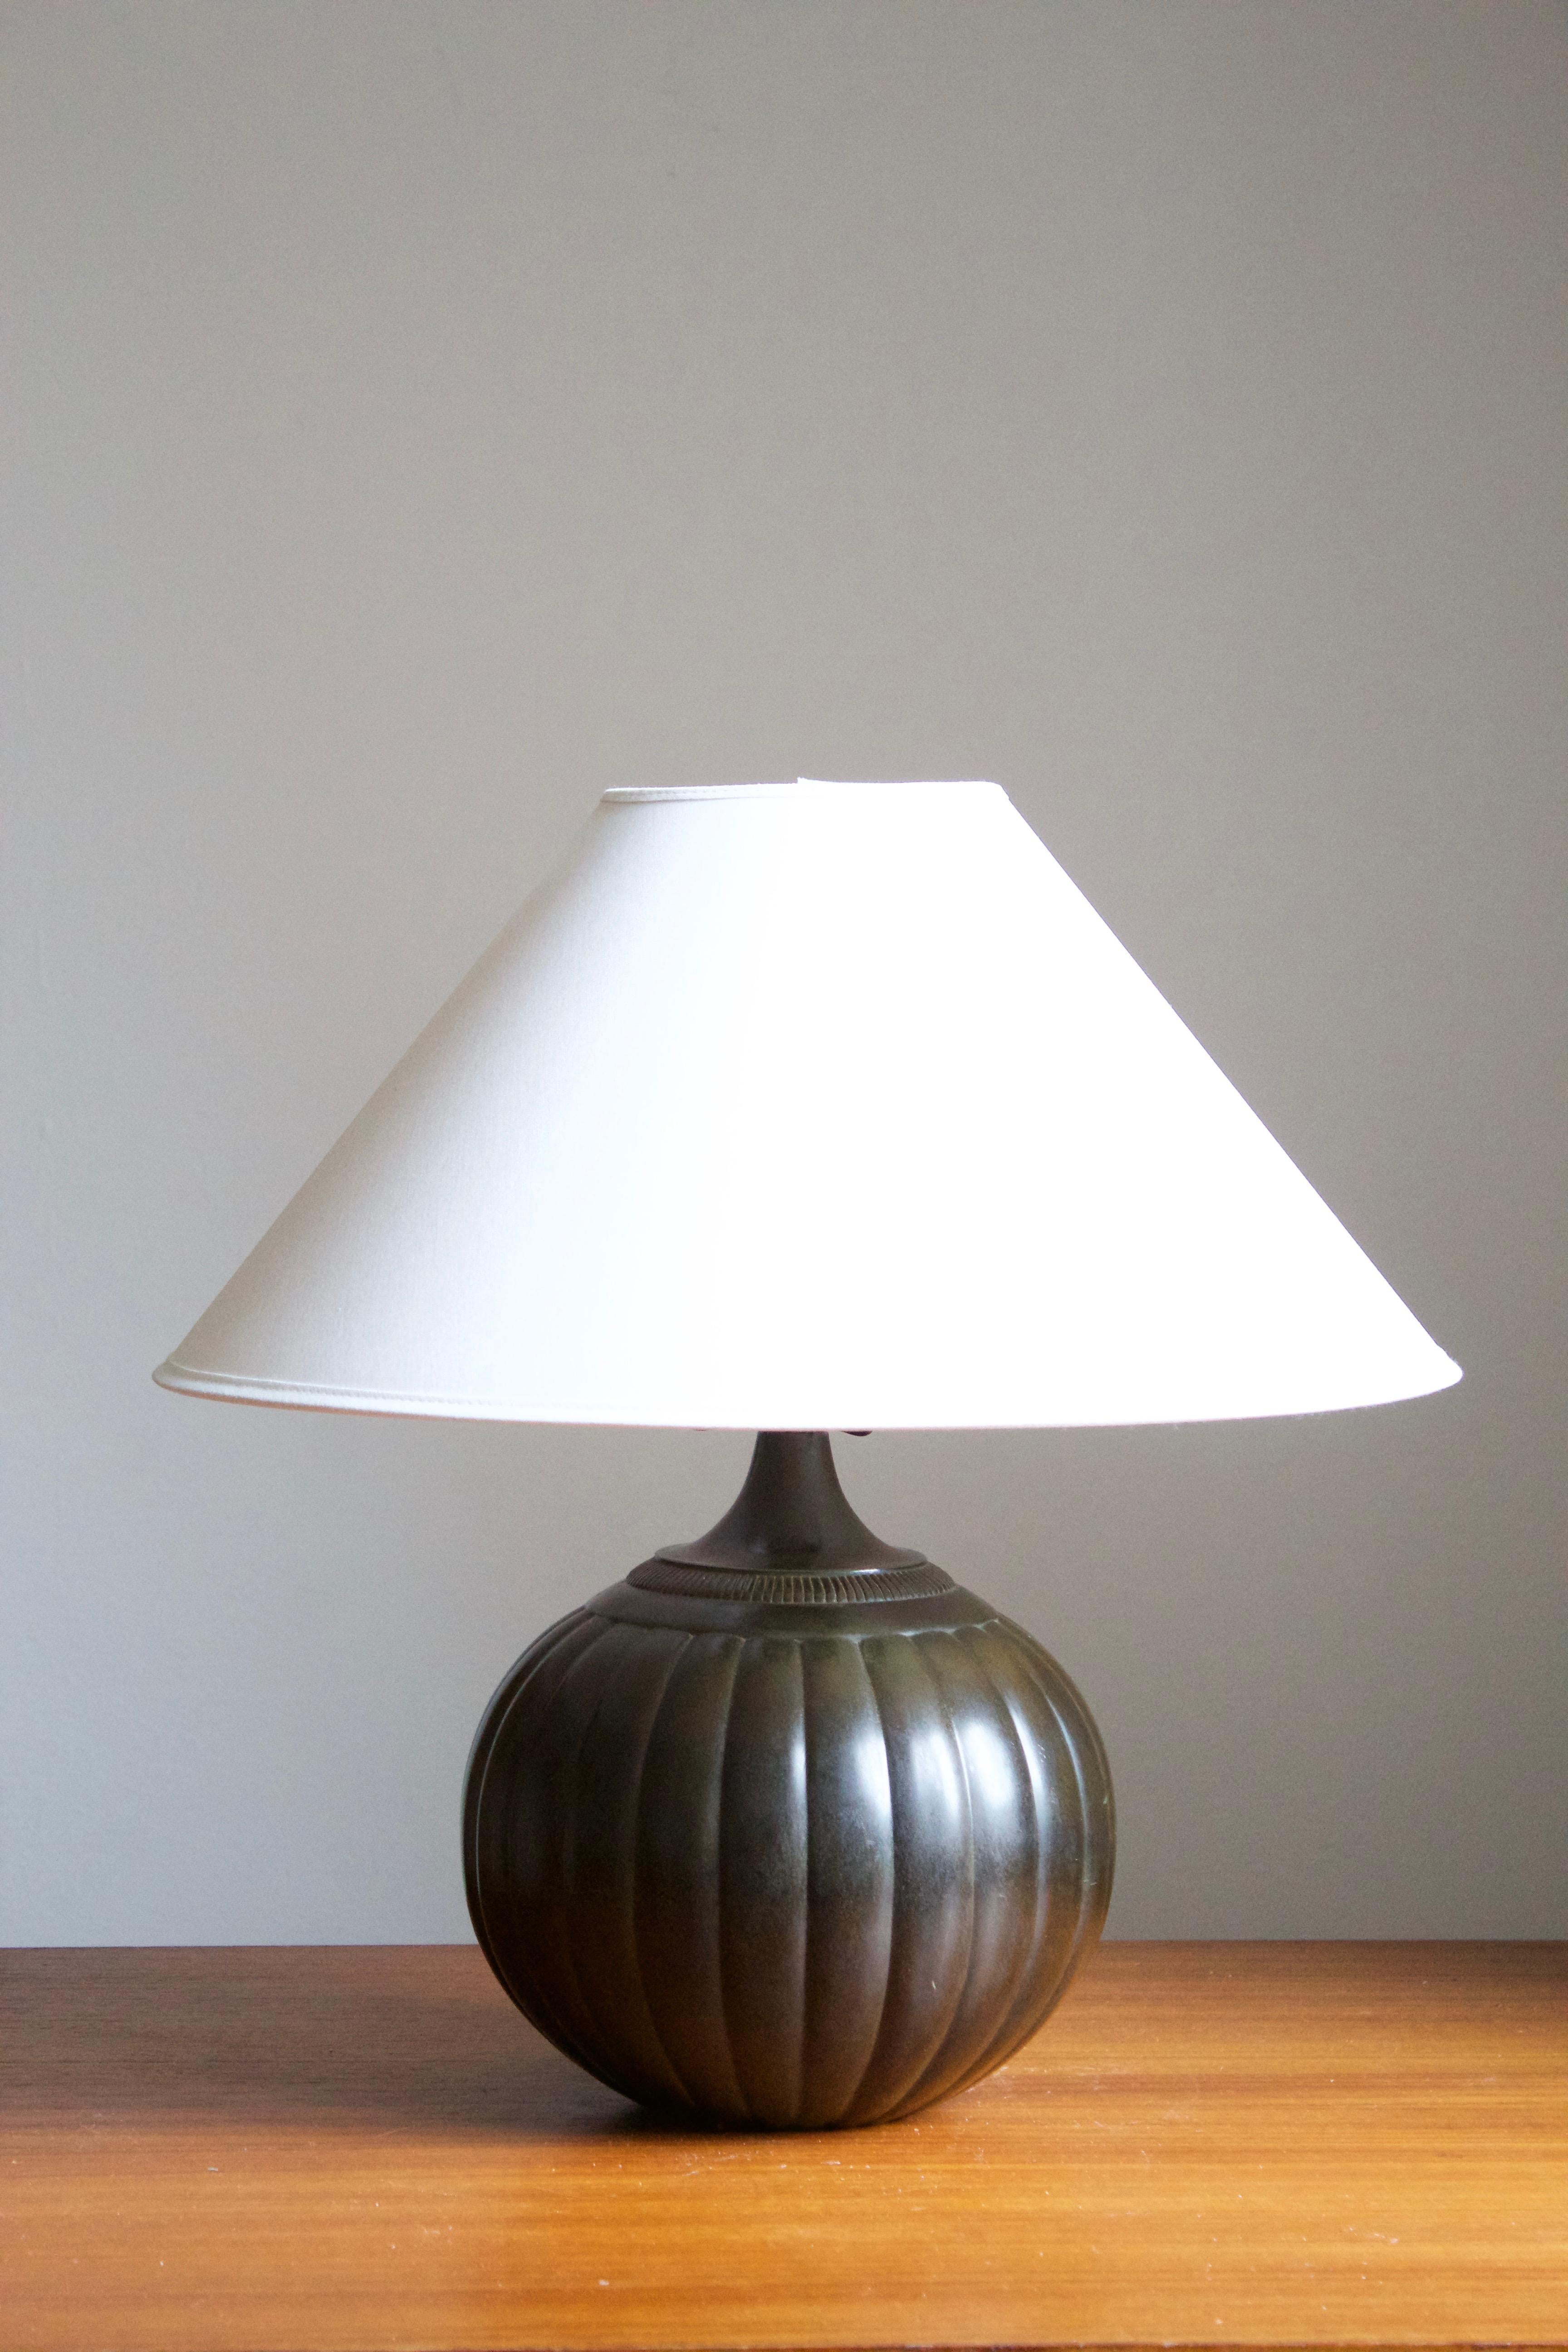 A 1930s table lamp by Just Andersen, Denmark. Base marked 